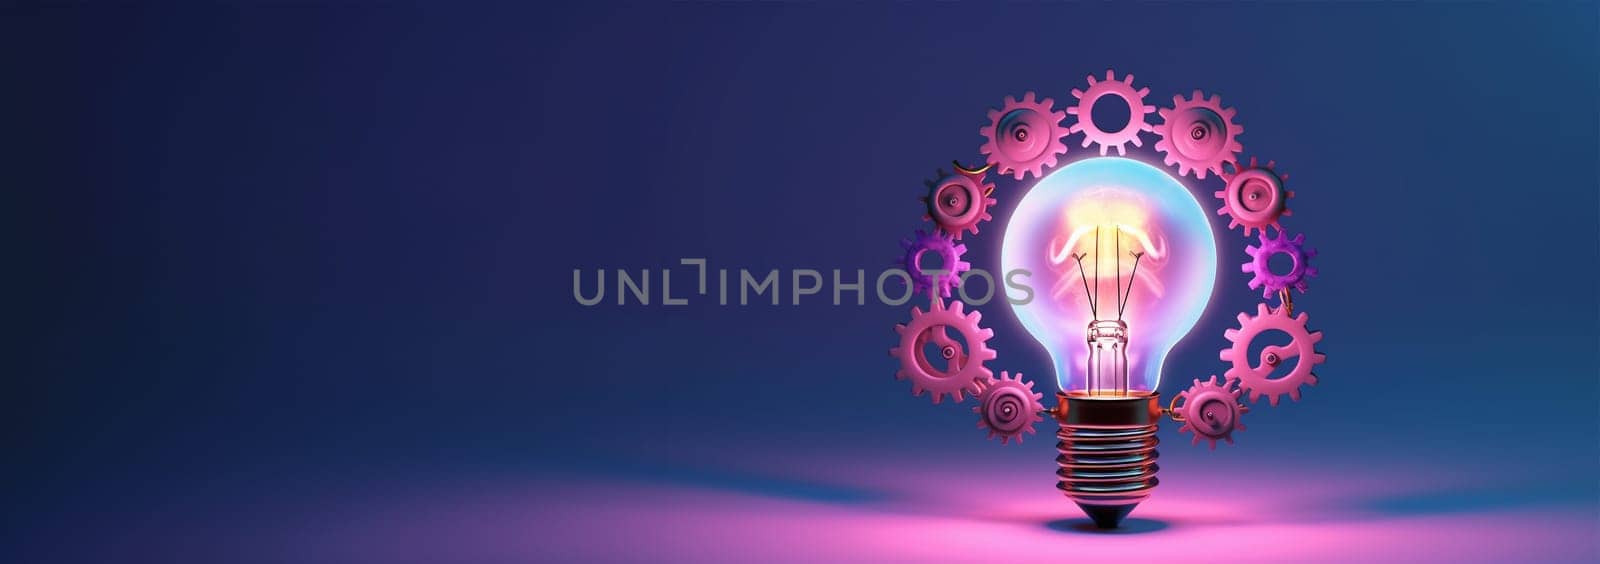 Idea and brainstorming concept Light bulb and gears 3d render. Innovation concept. Insight icon isolated on pastel background. 3D Illustration. Pink,purple and blue. Glow Idea,teamwork,brainstorming design by Annebel146